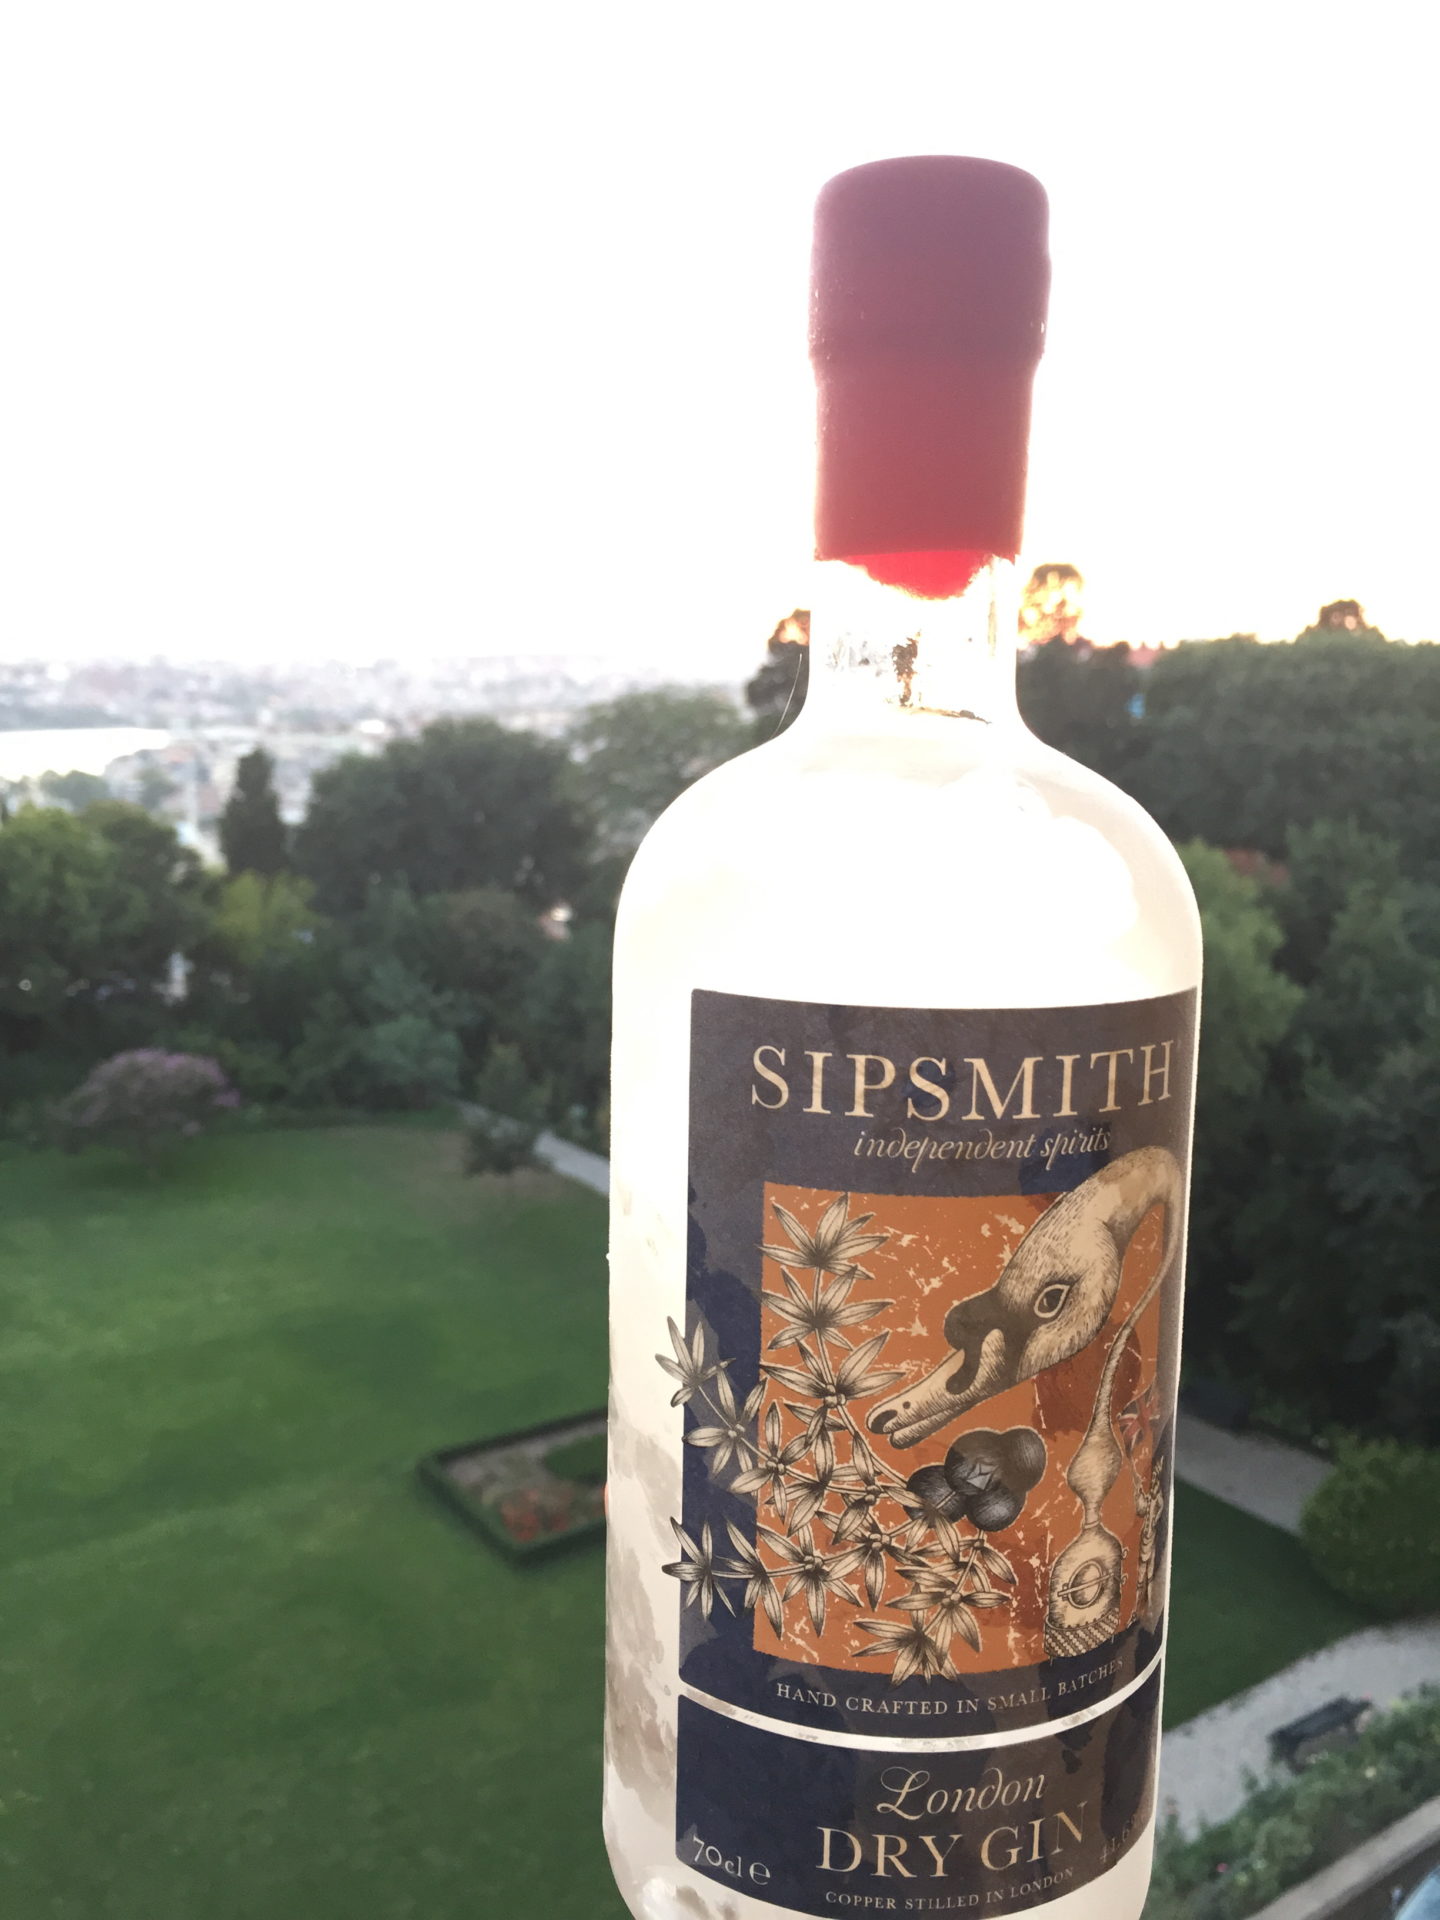 Tackling smartphone addiction with Sipsmith gin